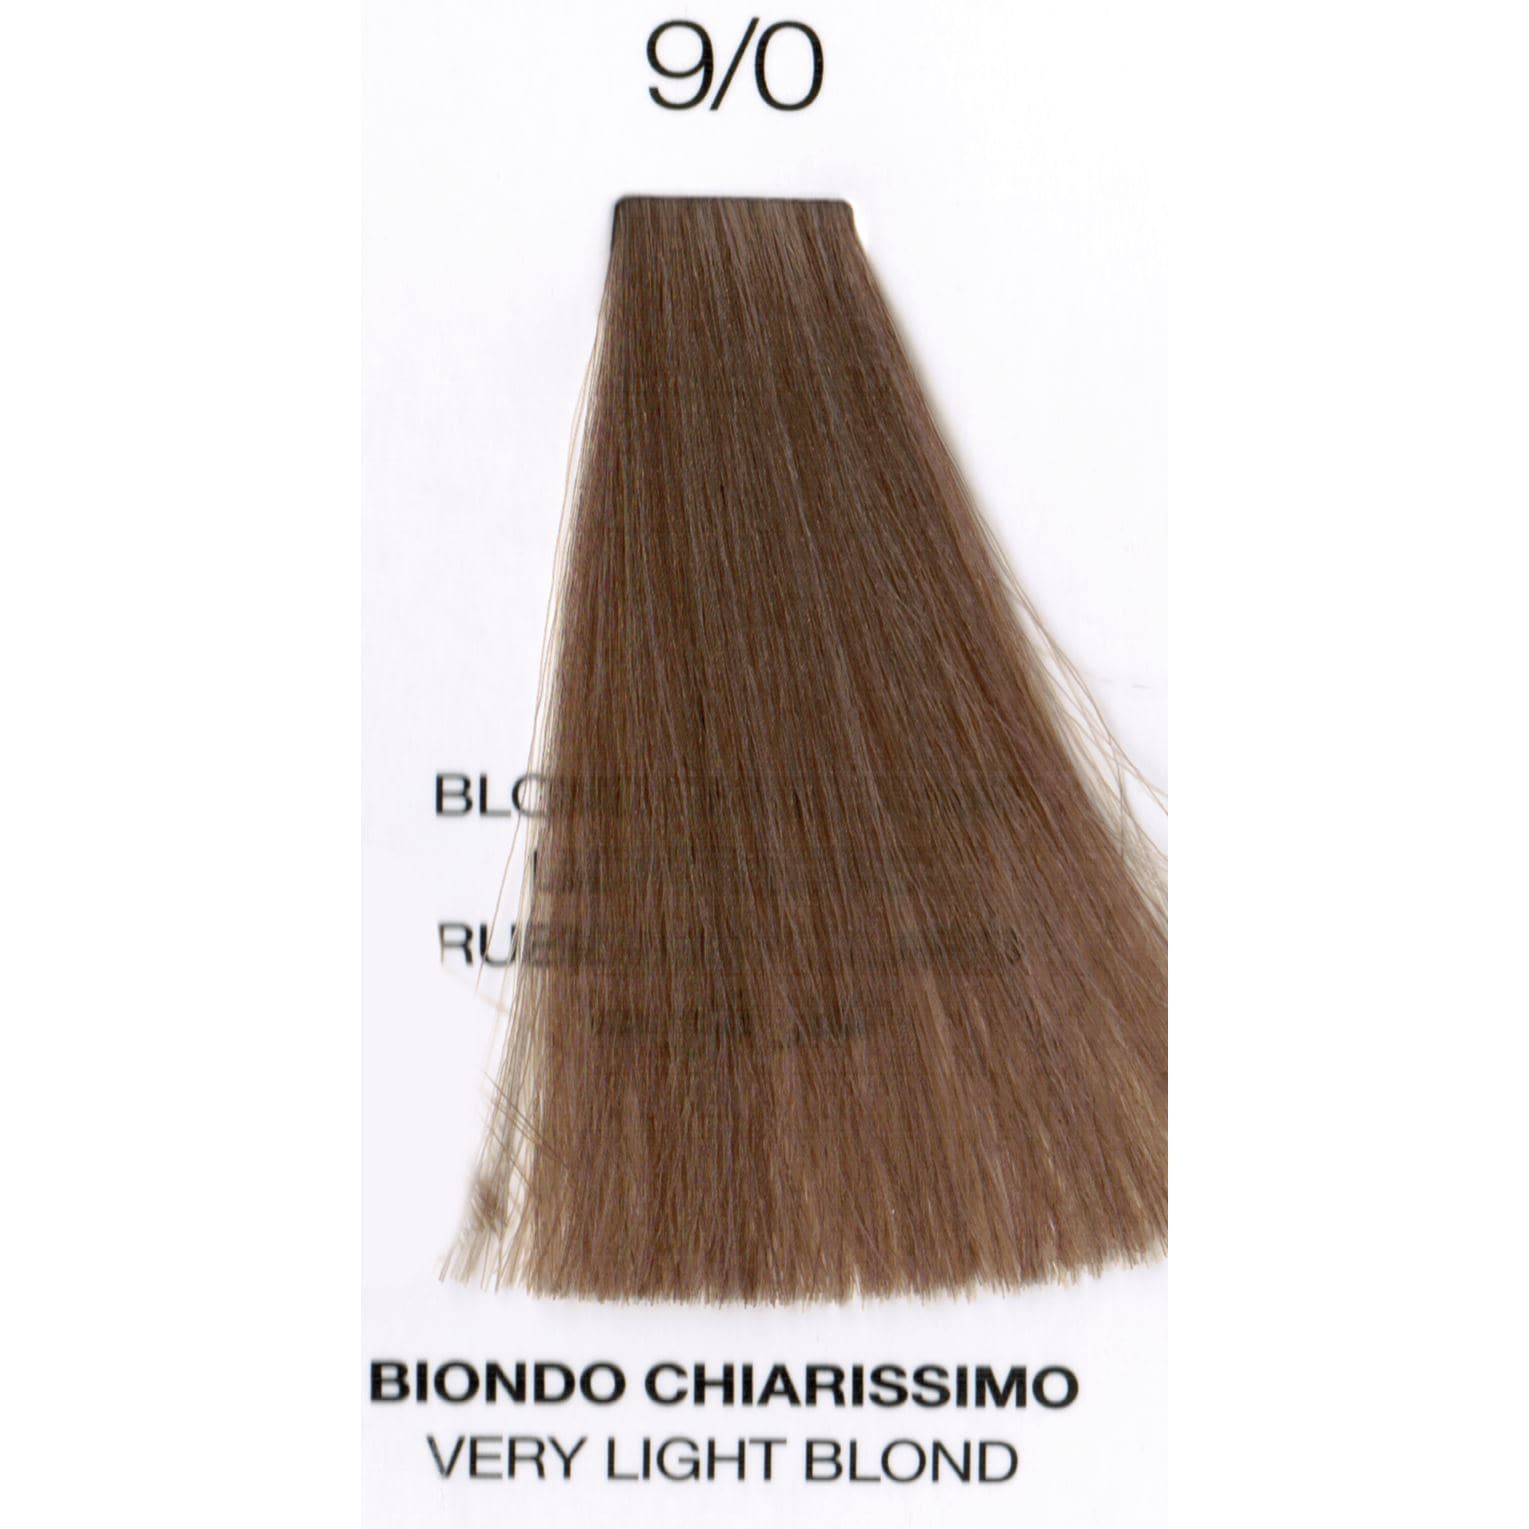 9/0 Very Light Blonde | Purity | Ammonia-Free Permanent Hair Color HAIR COLOR OYSTER 